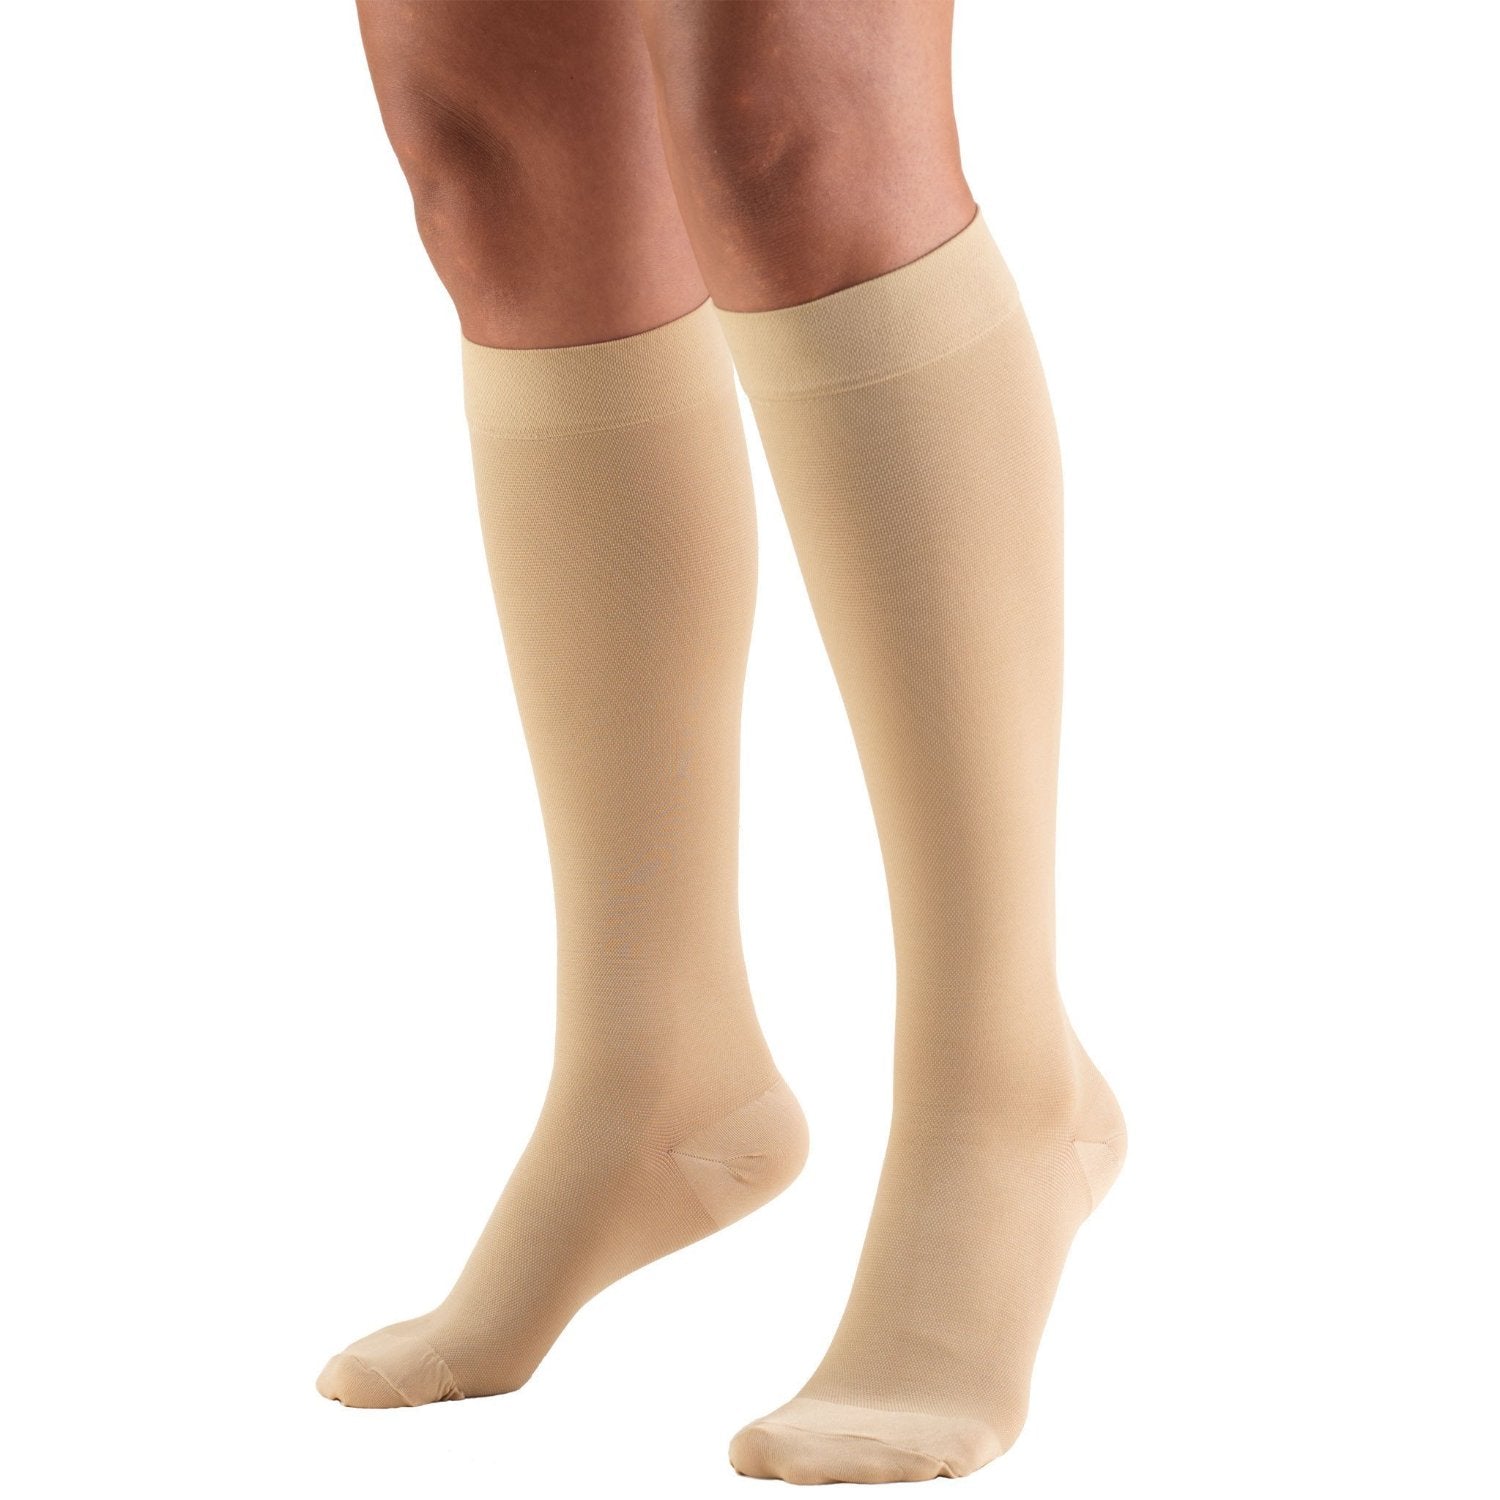 Medical Compression Pantyhose for Women & Men, Open Toe, Opaque, Firm  Support 15-20mmHg Graduated Compression Stockings, Help Relieve Swelling  Edema Varicose Veins, Nursing, Black Medium 